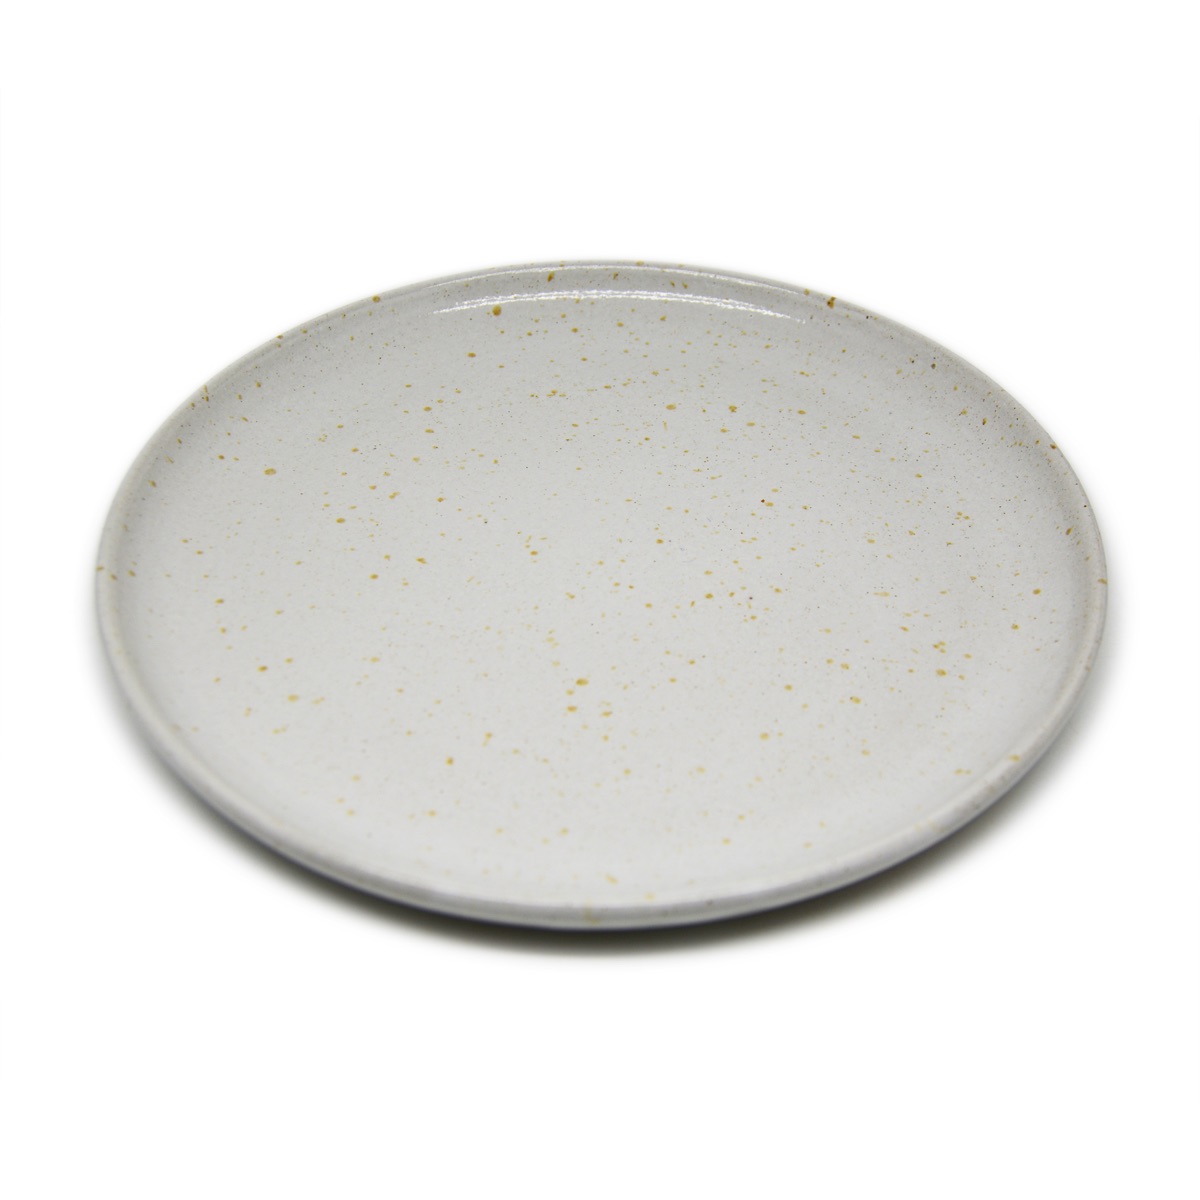 Europe Flat Round Plate D22